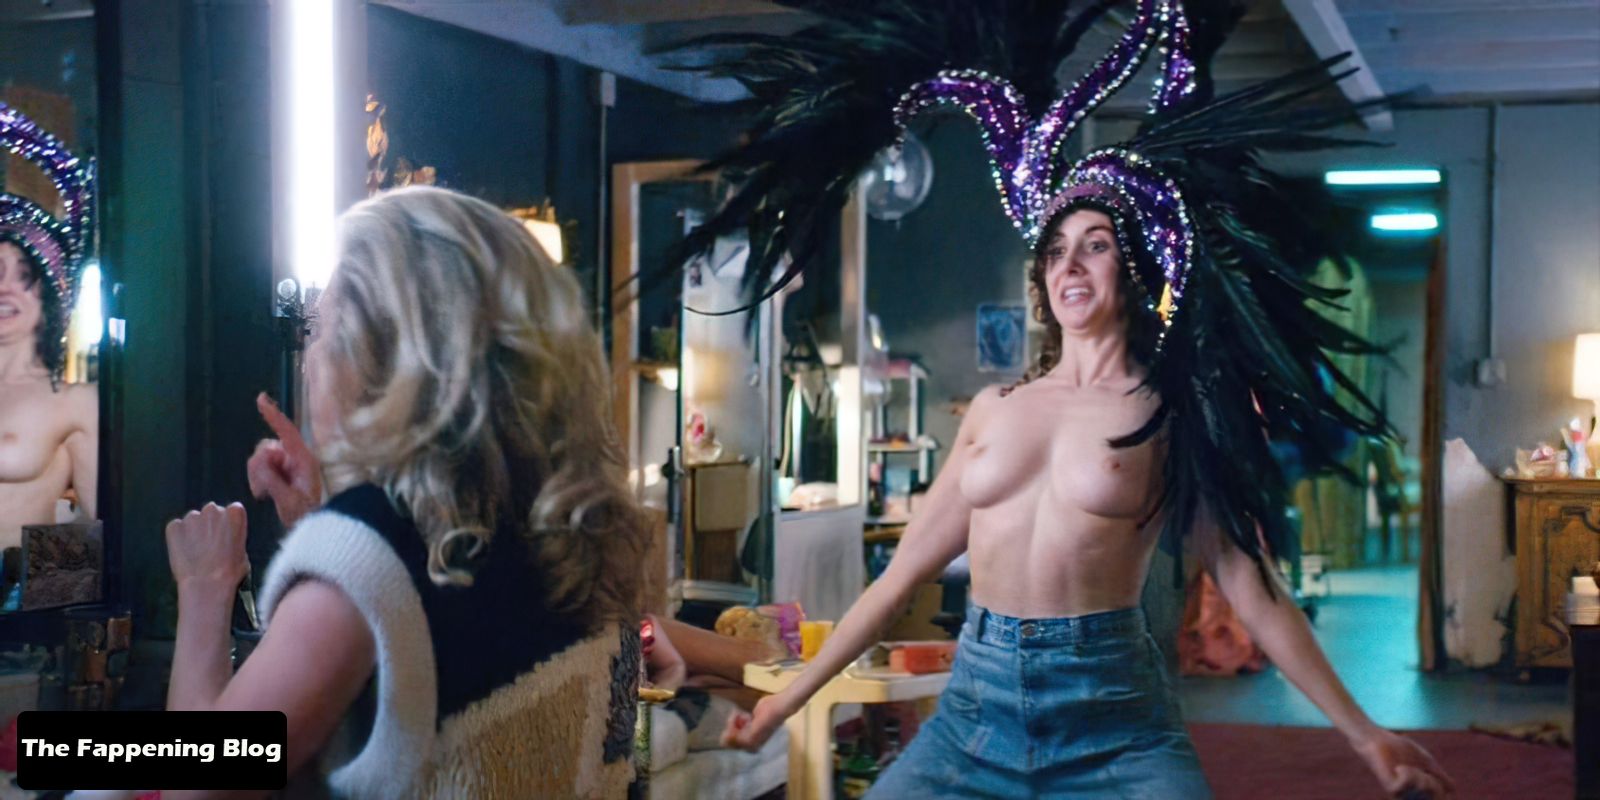 Alison-Brie-Nude-Porn-Photo-Collection-Leak-The-Fappening-Blog-47.jpg